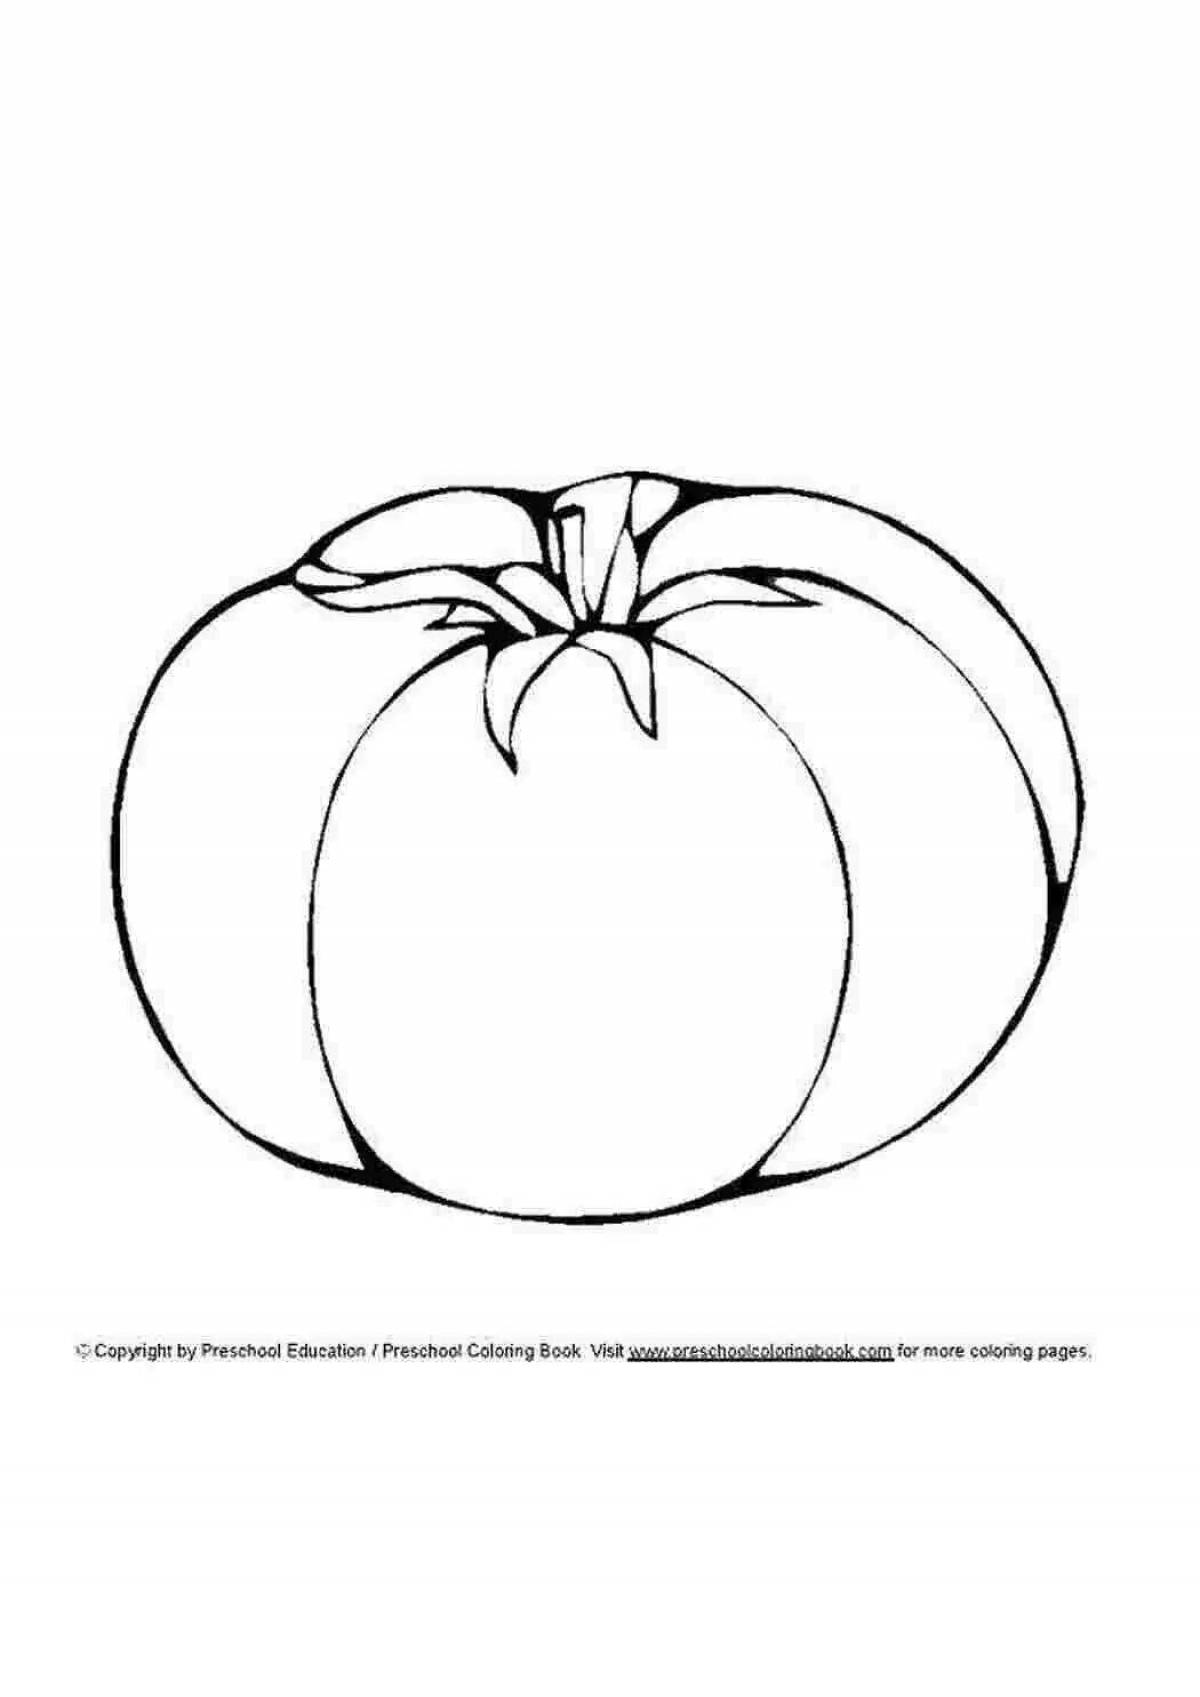 Fun coloring of cucumbers and tomatoes for children